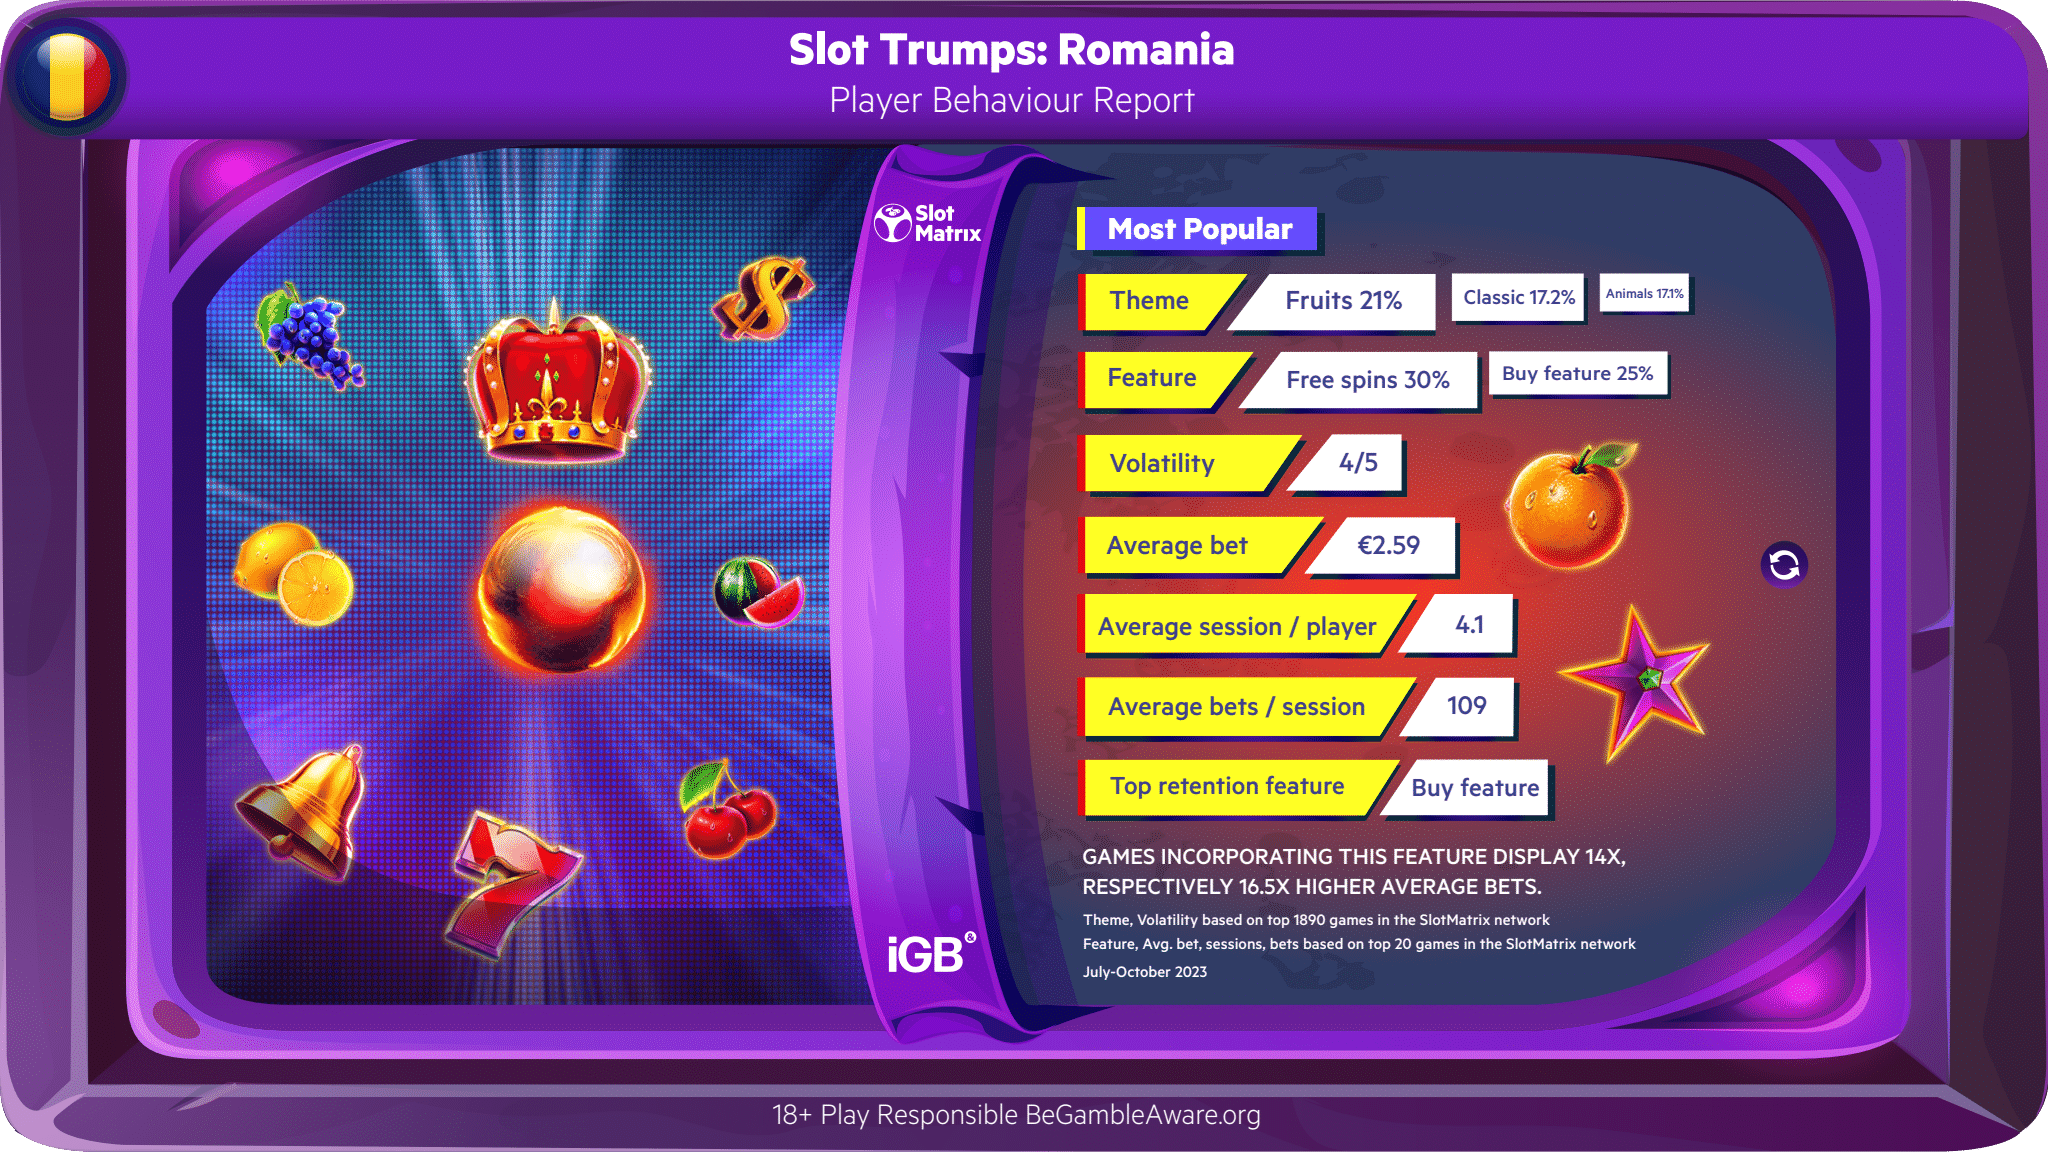 Romania’s Classic Slots Fans Get a Gaming Experience Boost